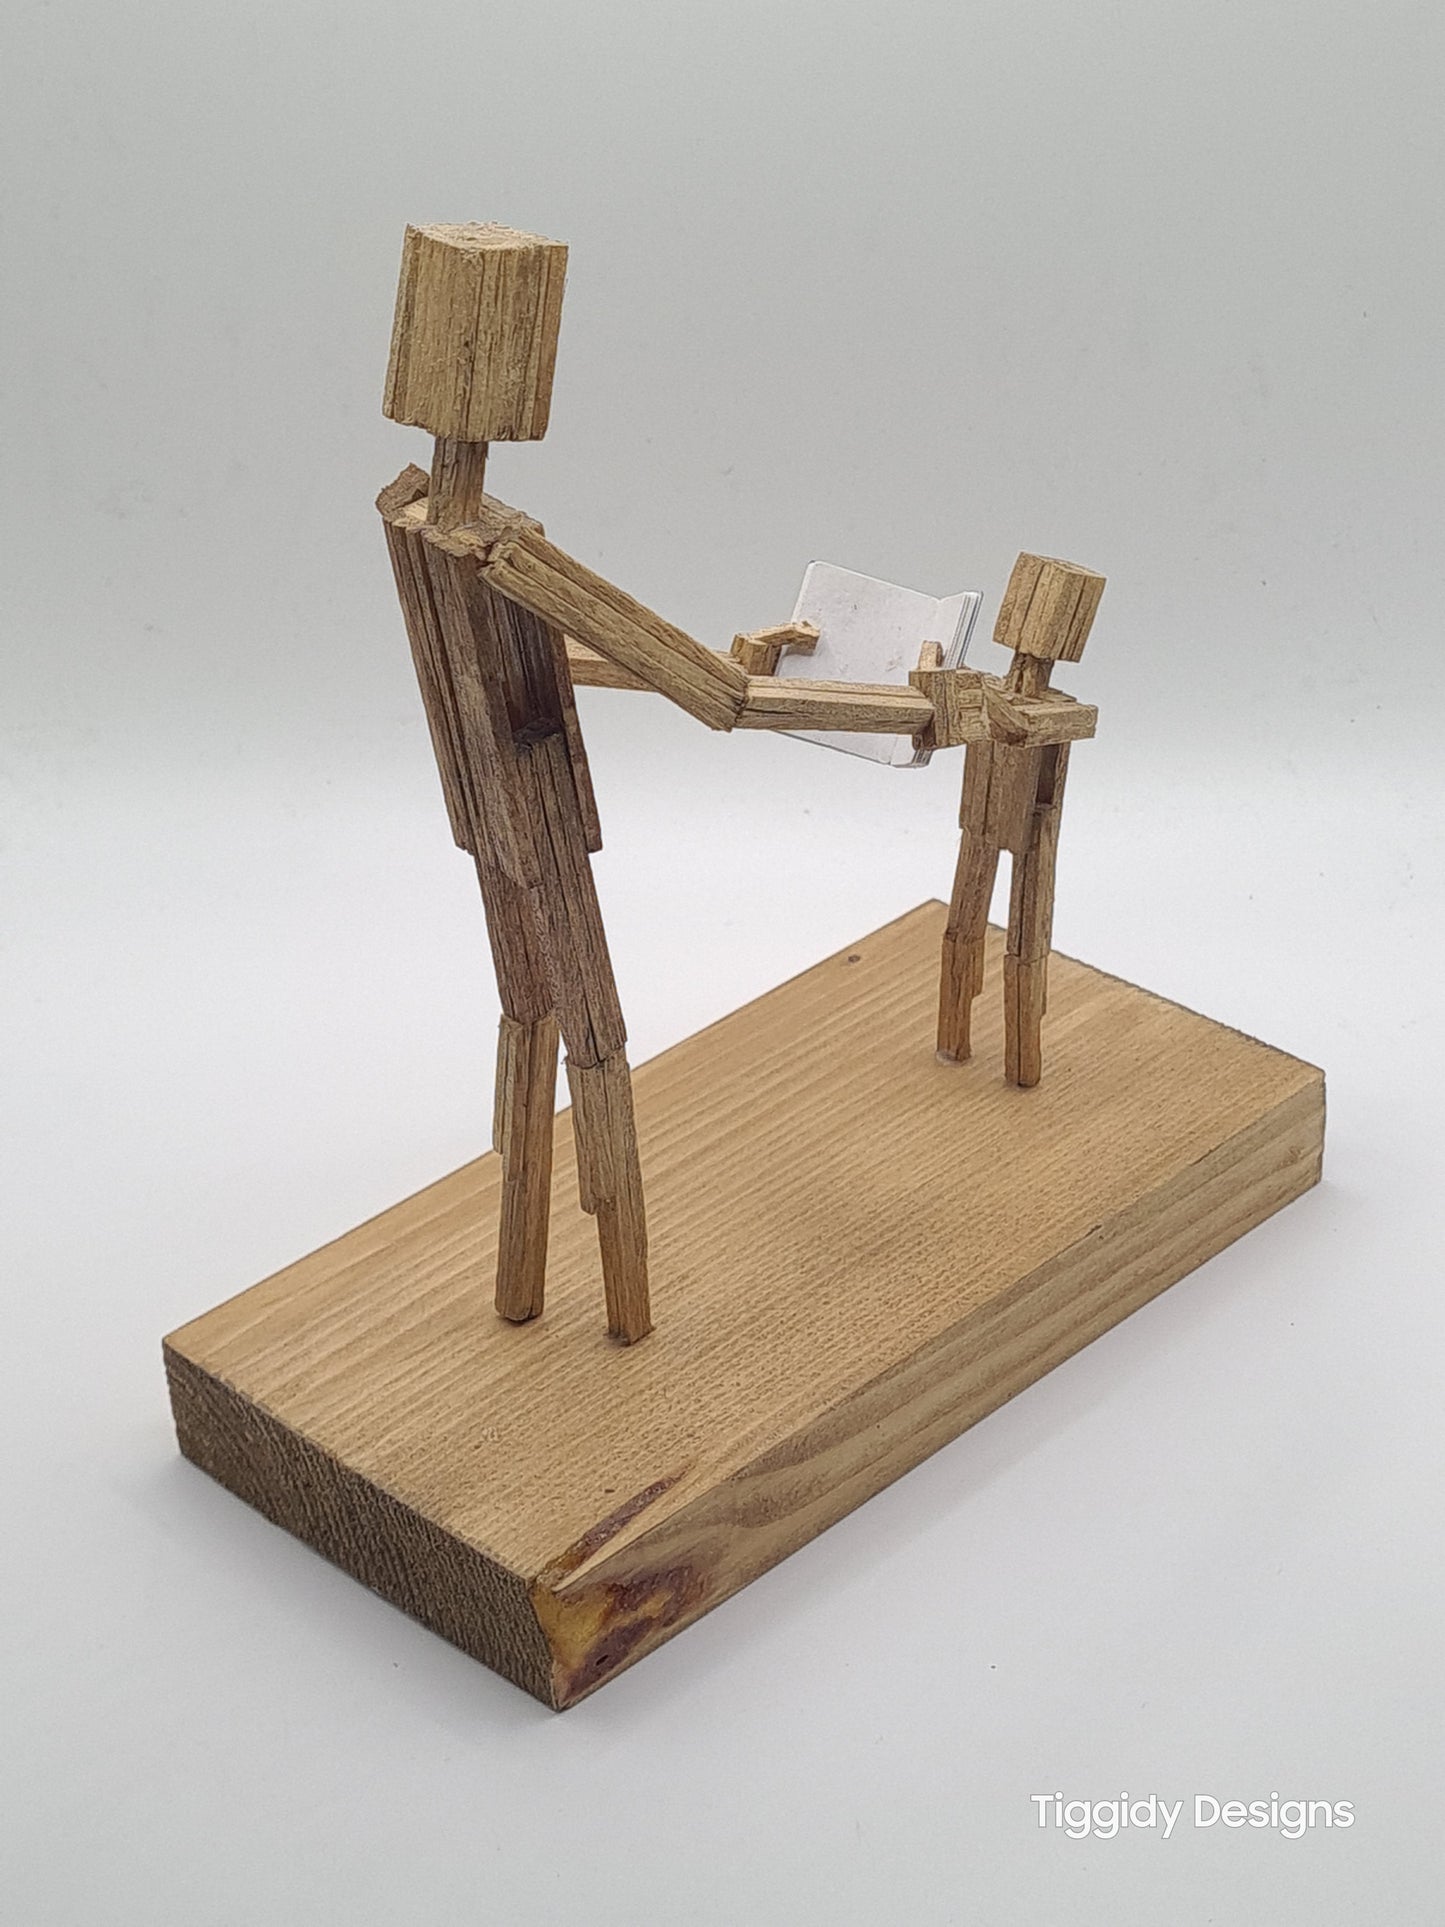 Look What I Did - Handcrafted Wooden Matchstick Figures - Gifts, Ornaments and Decor By Tiggidy Designs